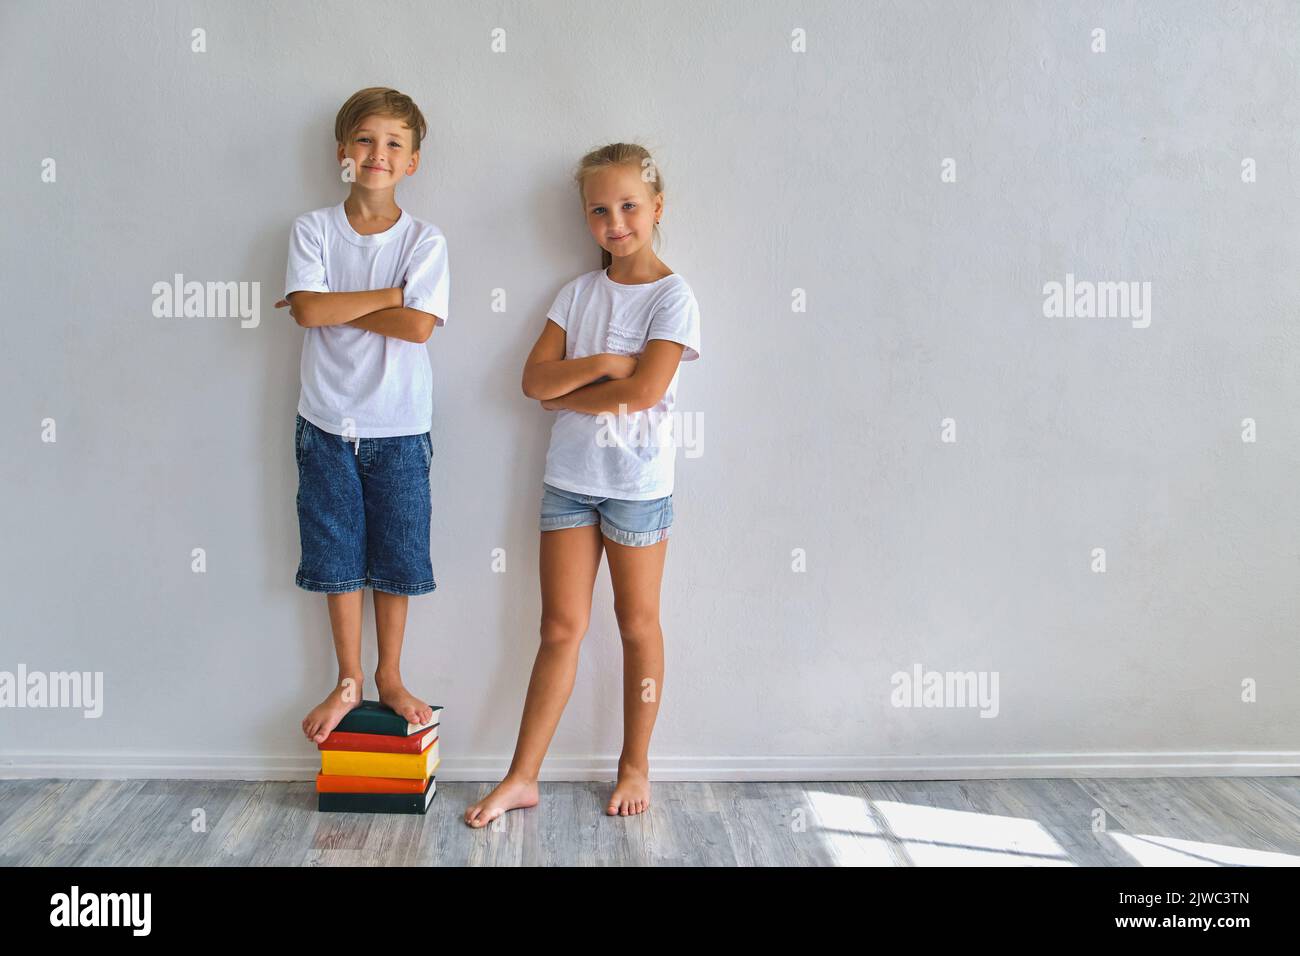 Cool kids, little boy and girl measure their height a Stock Photo